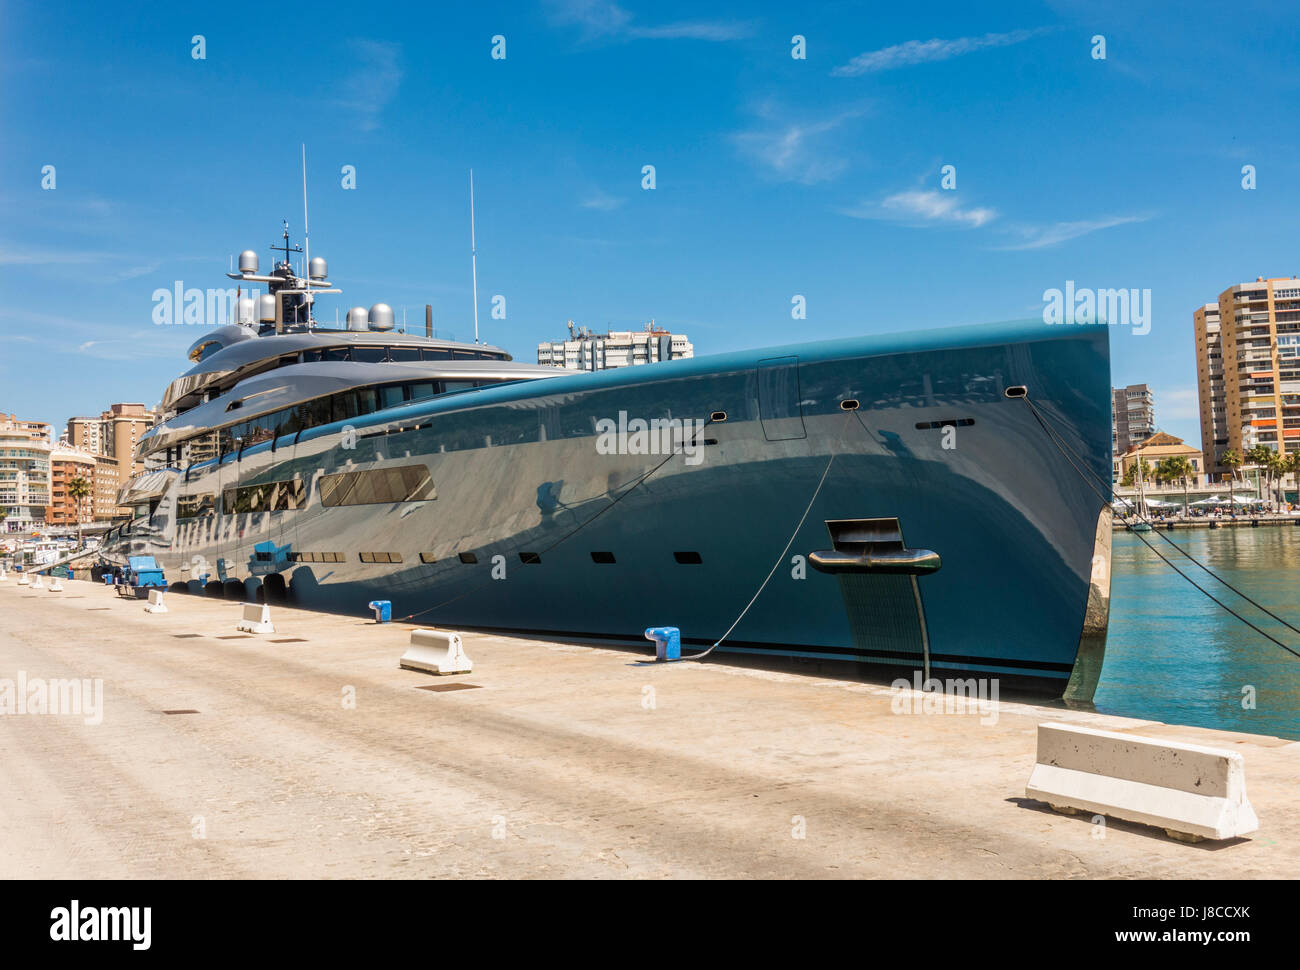 Aviva mega yacht, super yacht, yacht, yachts, owned by British billionaire businessman Joe Lewis, moored in the port of Malaga, Andalusia, Spain. Stock Photo